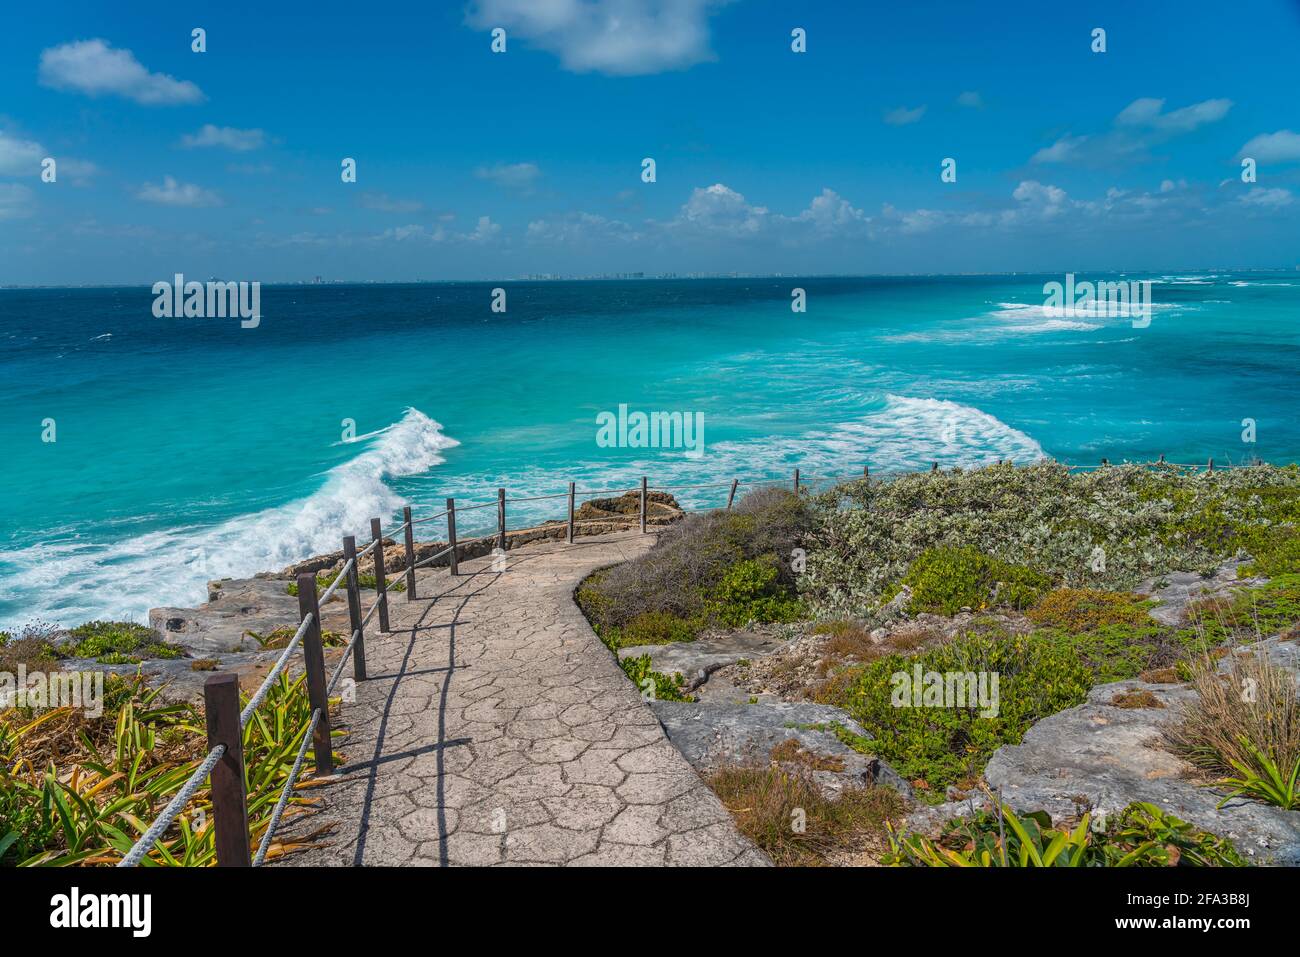 Isla Mujeres South Point Punta Sur Cancun Mexico Island turquoise water and way to the rocky coastline, background blue sky Stock Photo